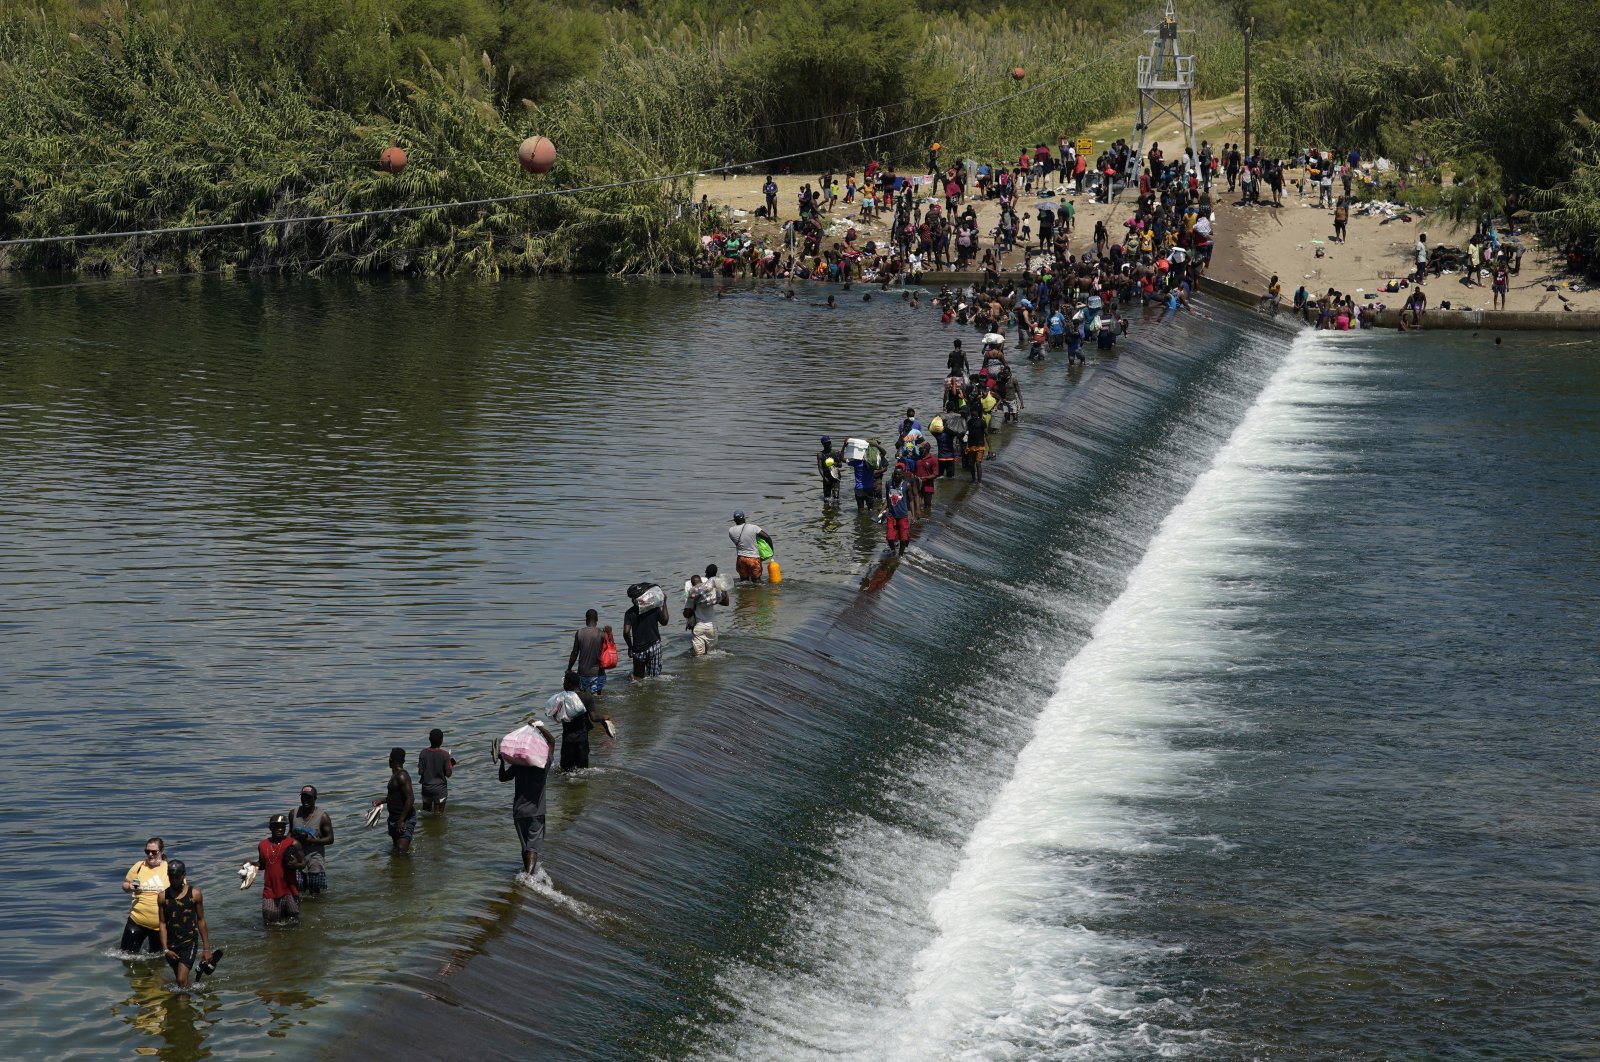 Haitian migrants use a dam to cross into the United States from Mexico in Del Rio, Texas, U.S., Sept. 18, 2021. (AP Photo)